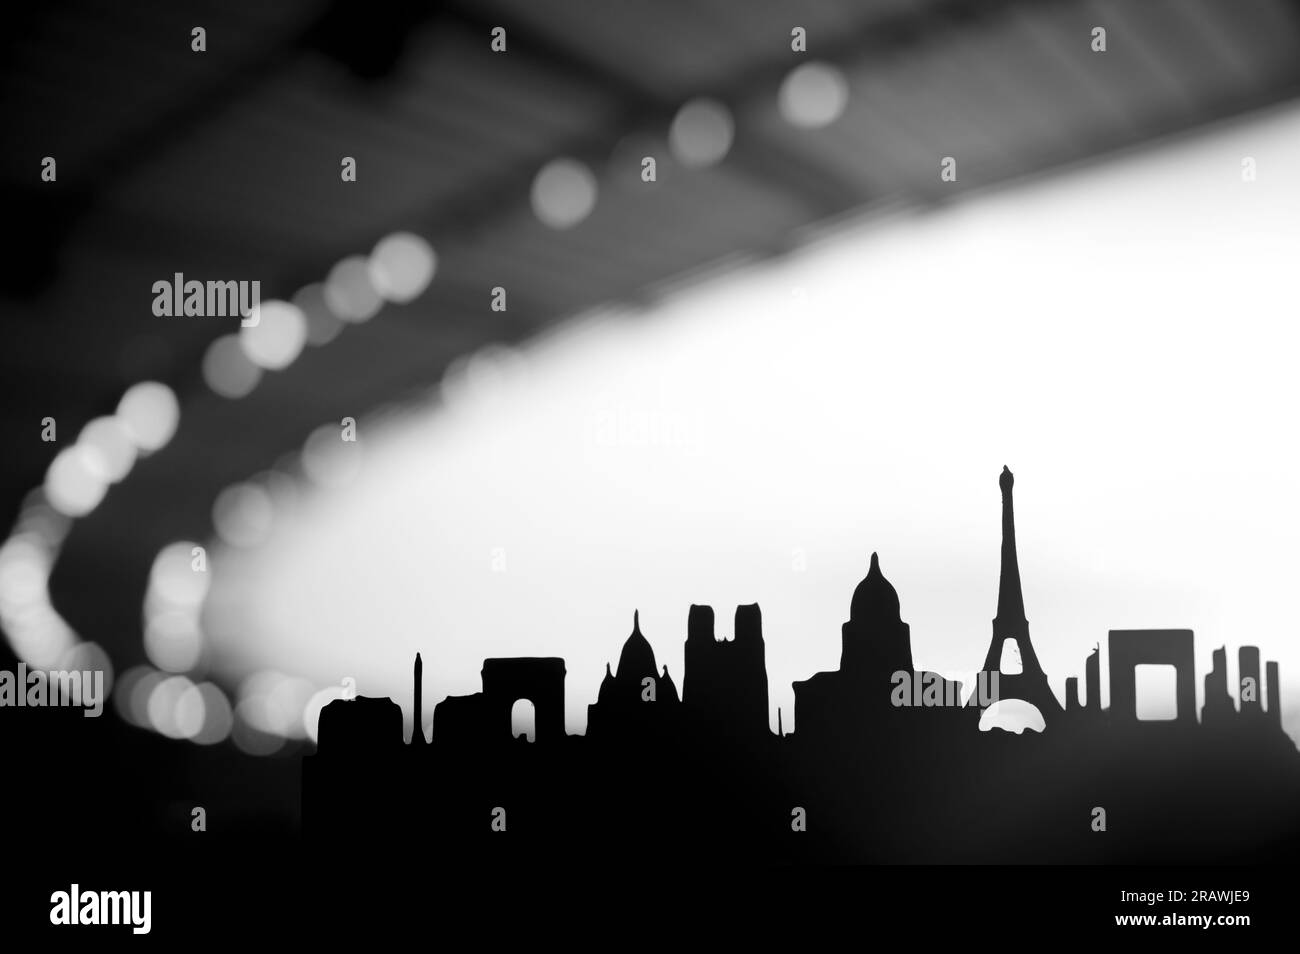 Embracing the Parisian Spirit: Silhouette Sets the Tone for the 2024 Sports Games. Black and White photo Stock Photo